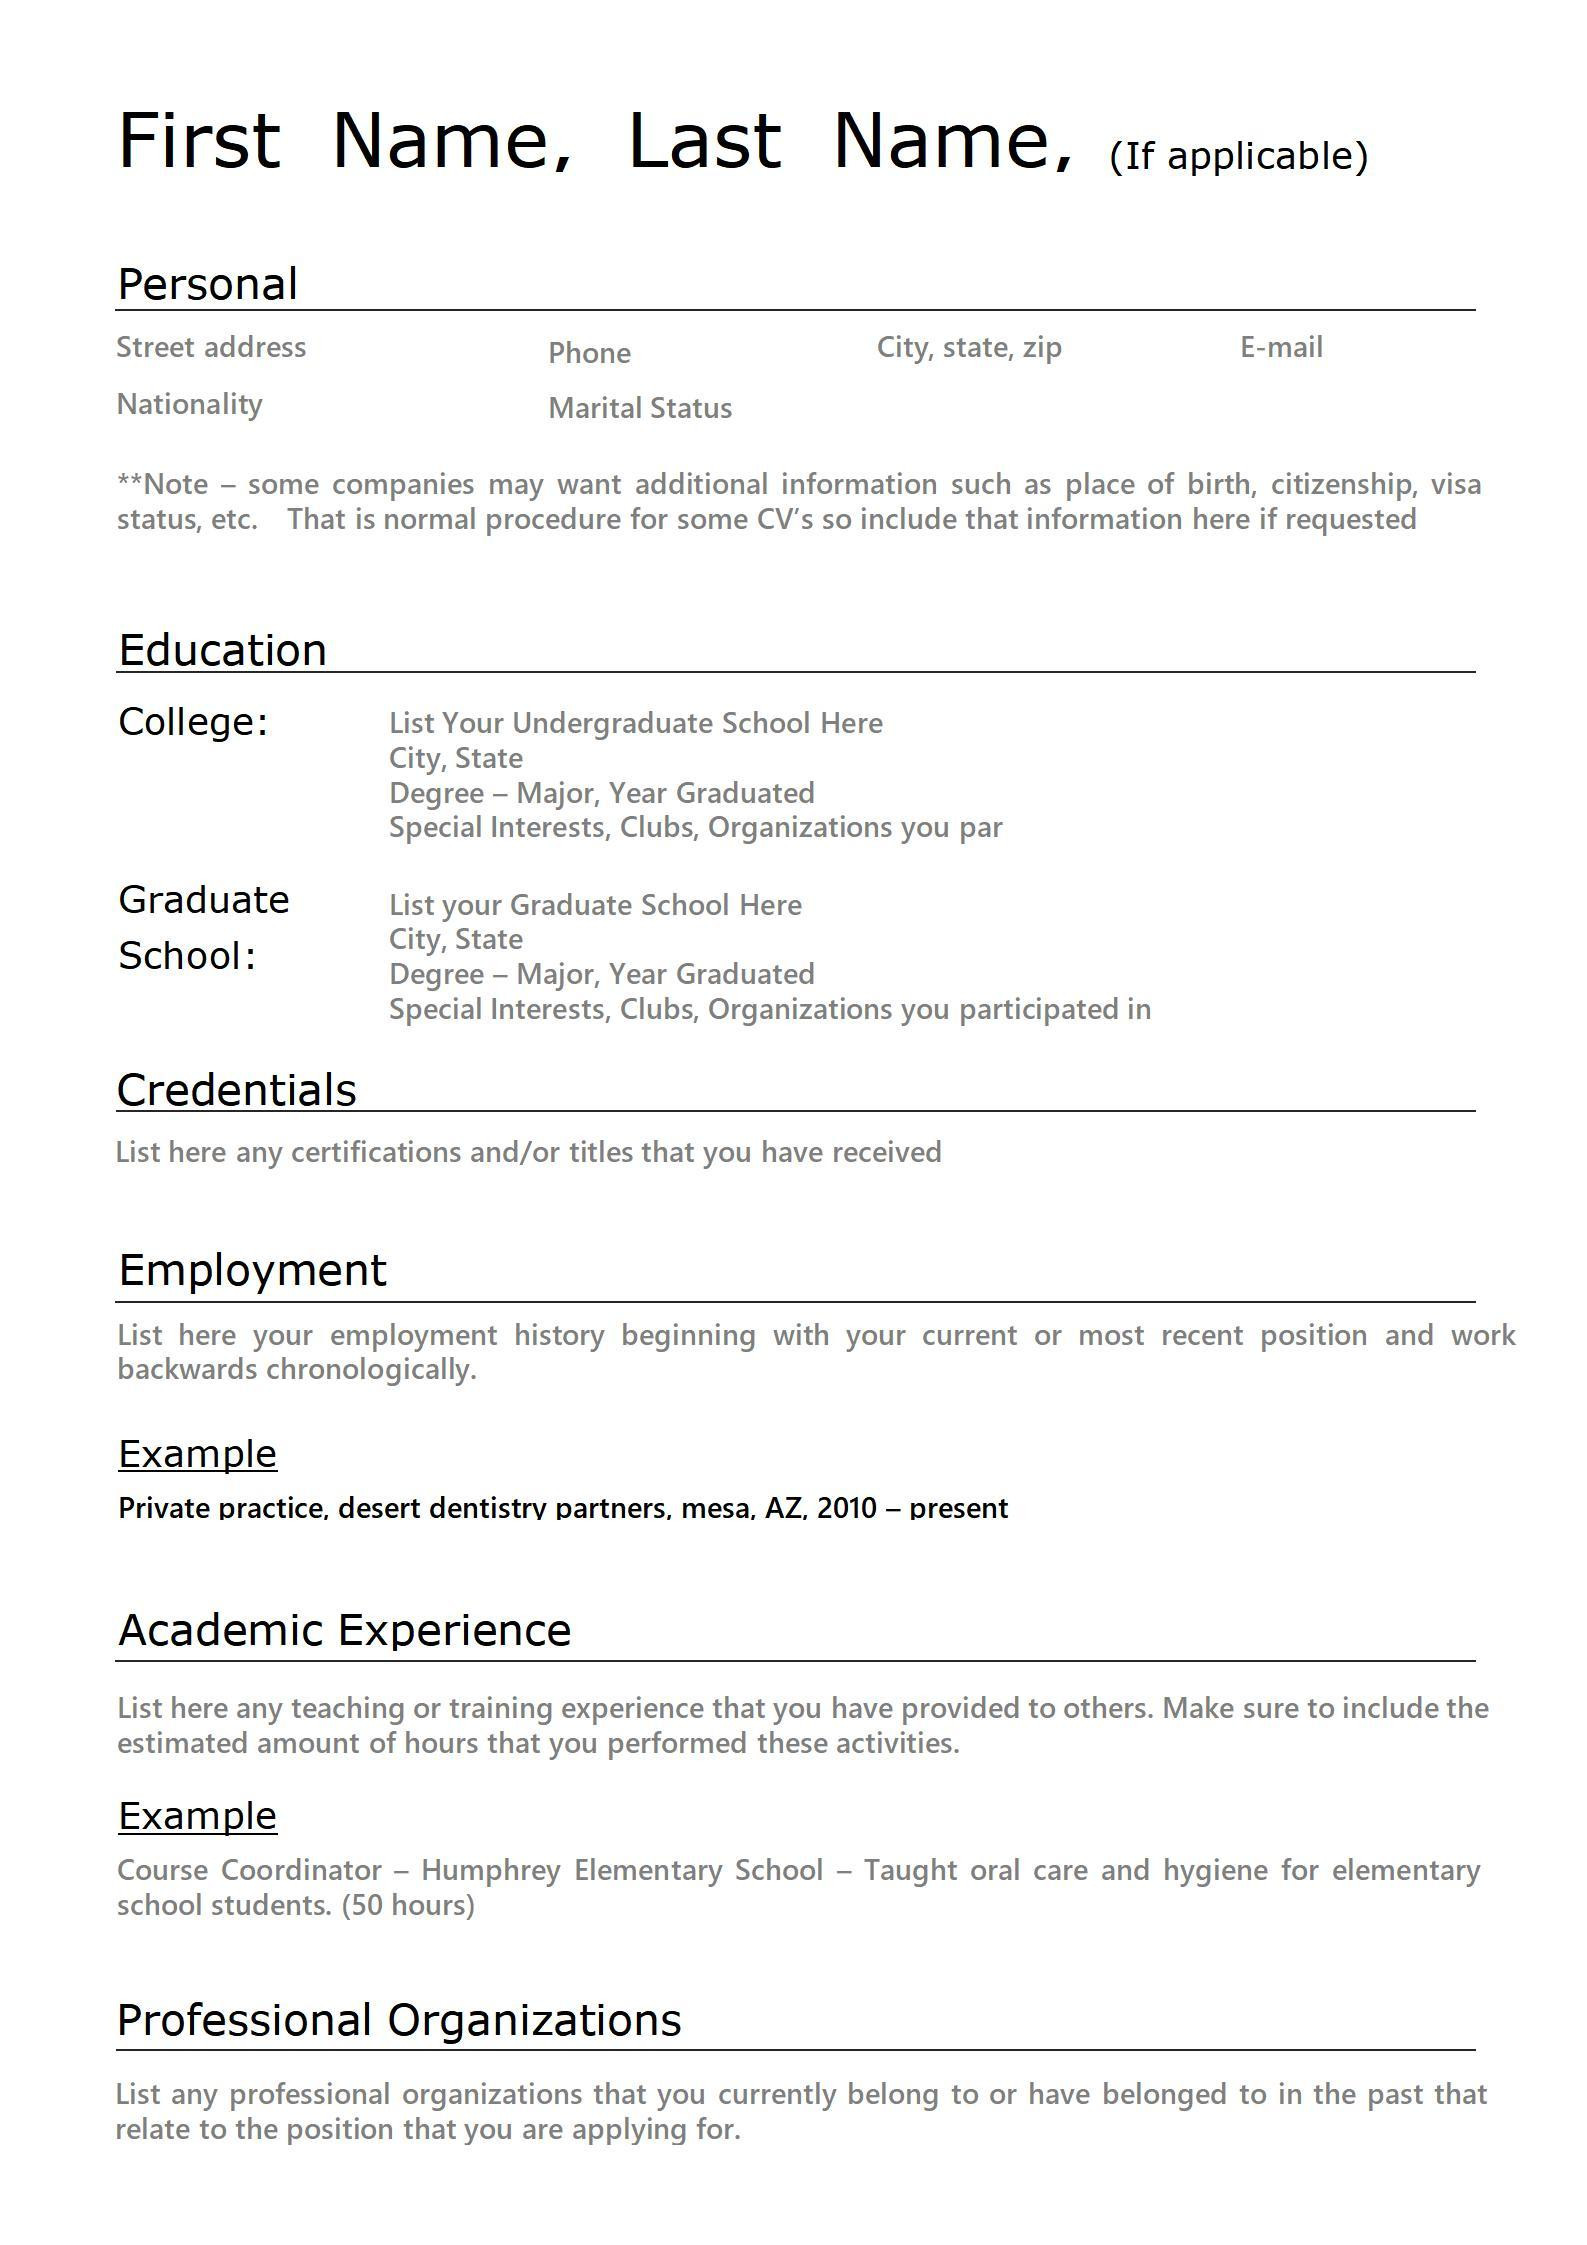 Resume for First Job for Students Sample First-time Resume with No Experience Samples Wps Office Academy